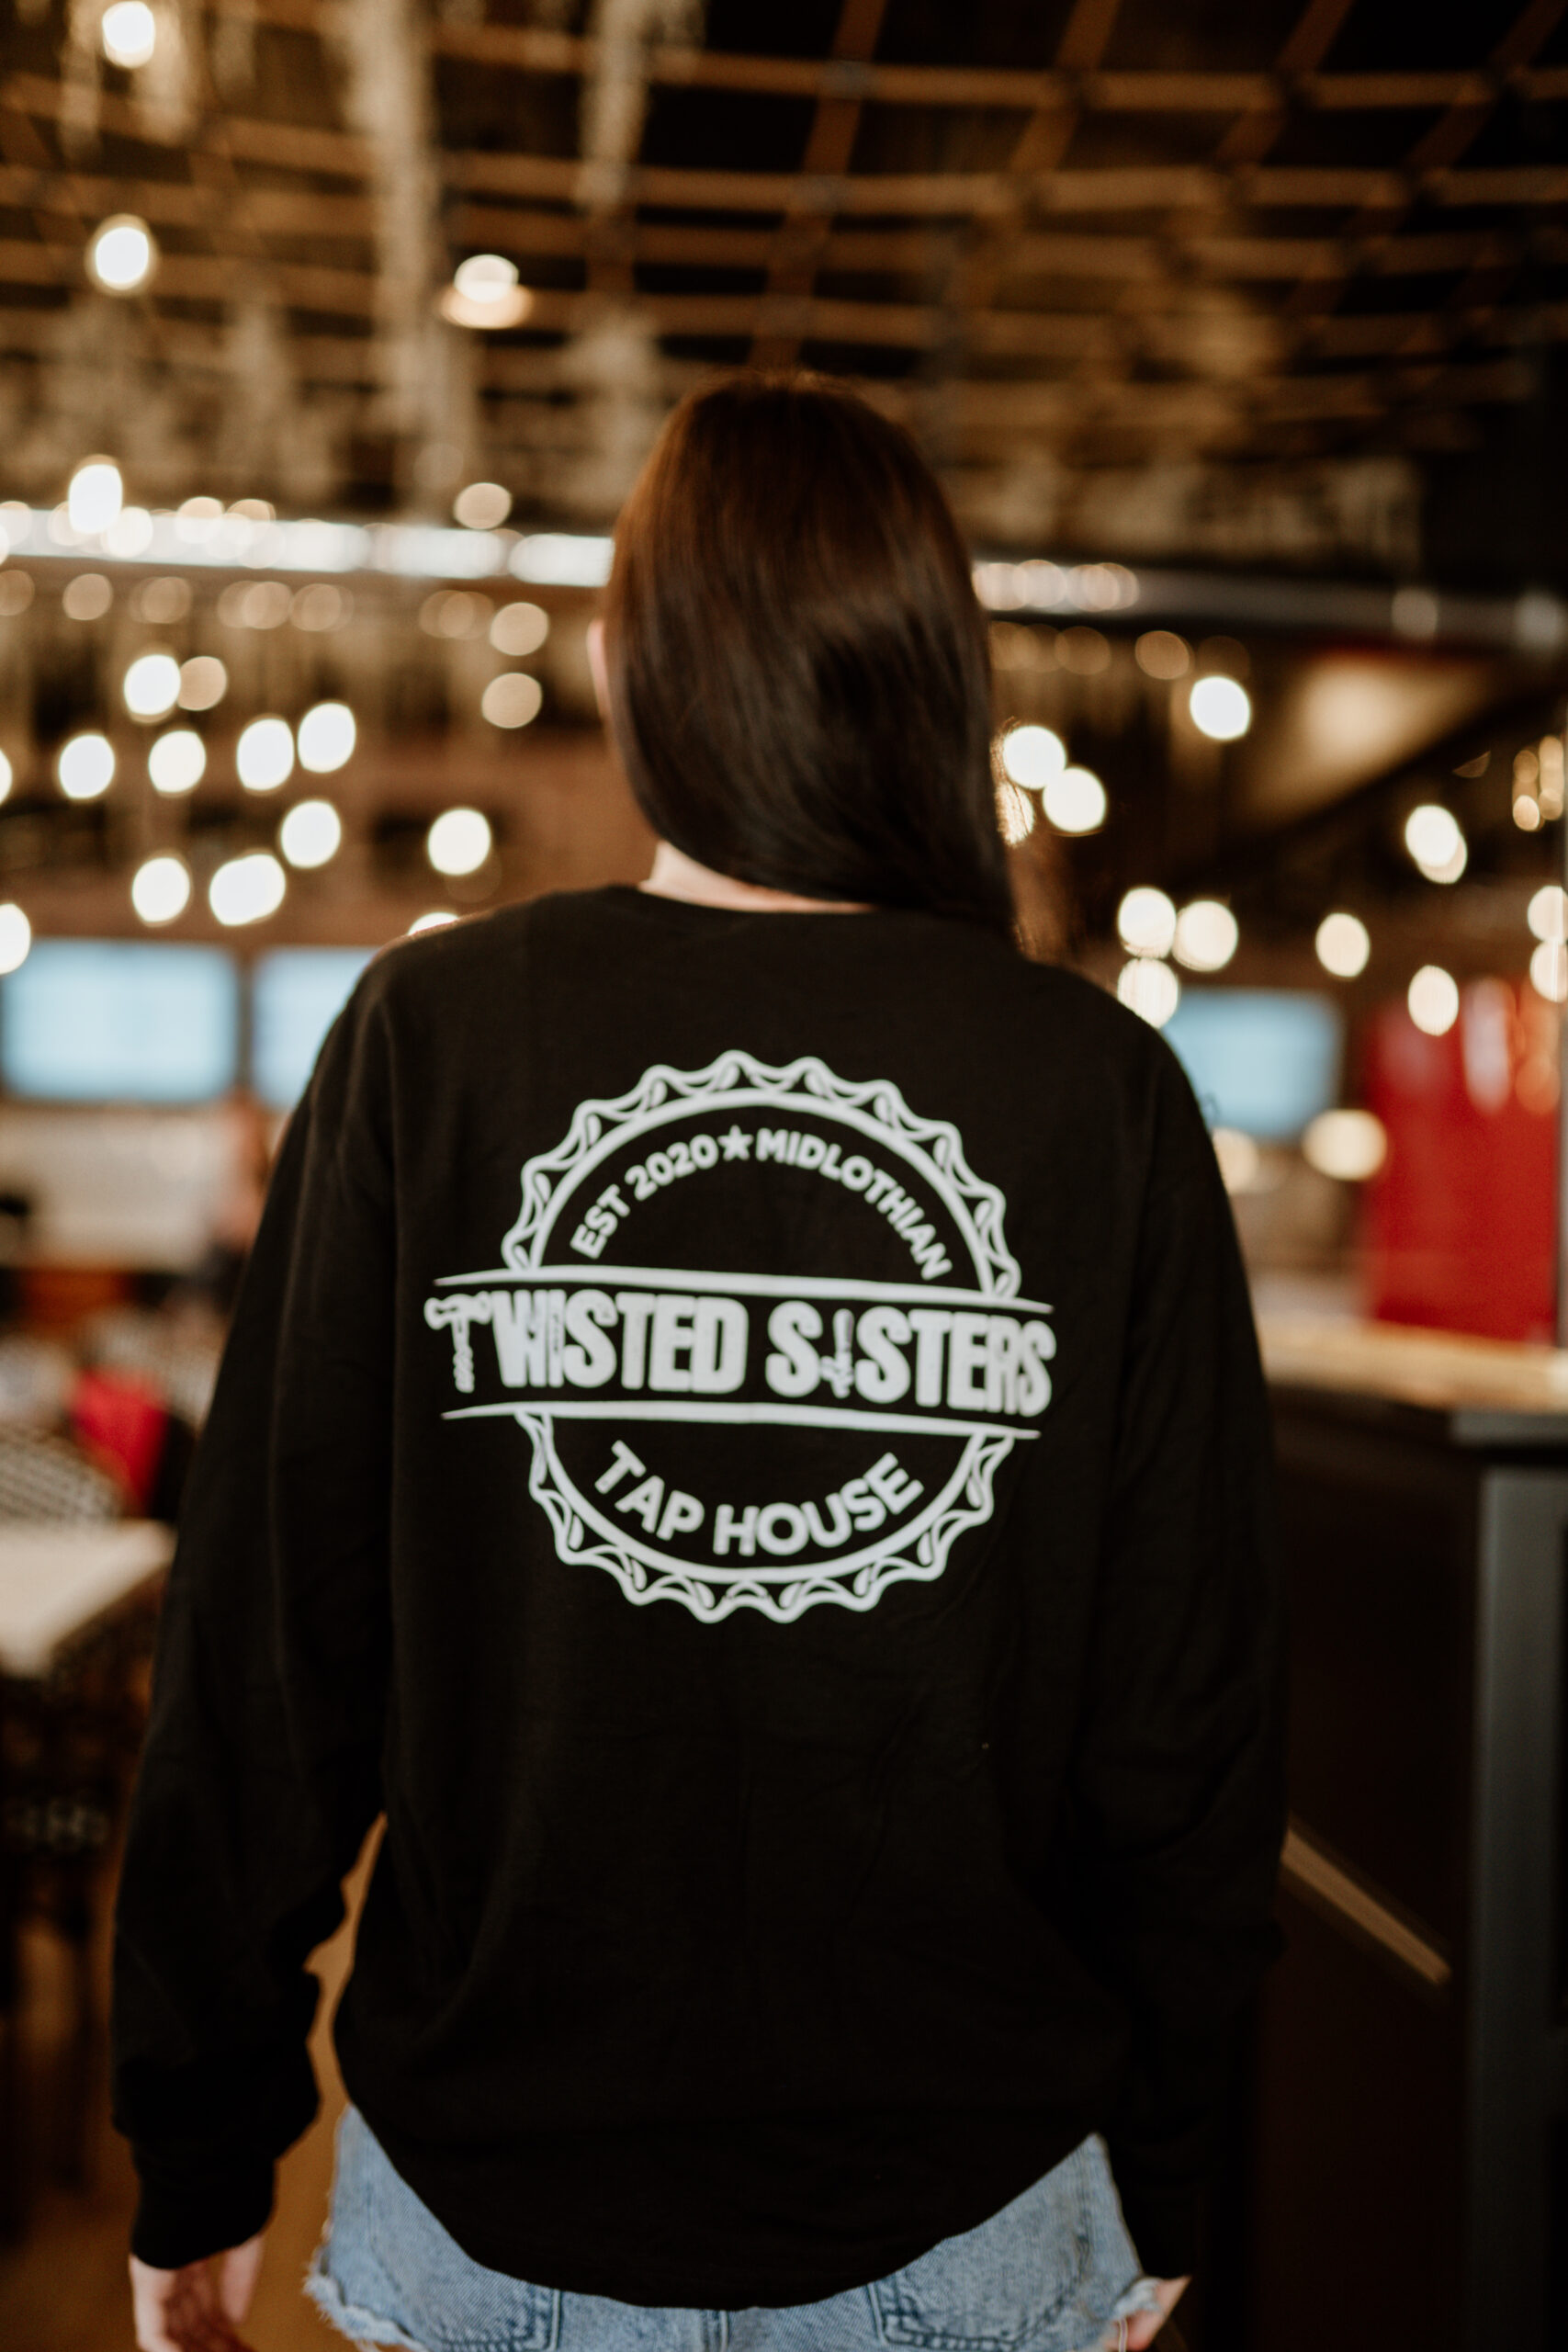 Twisted Sisters Long Sleeve Shirt - Twisted Sisters Taphouse